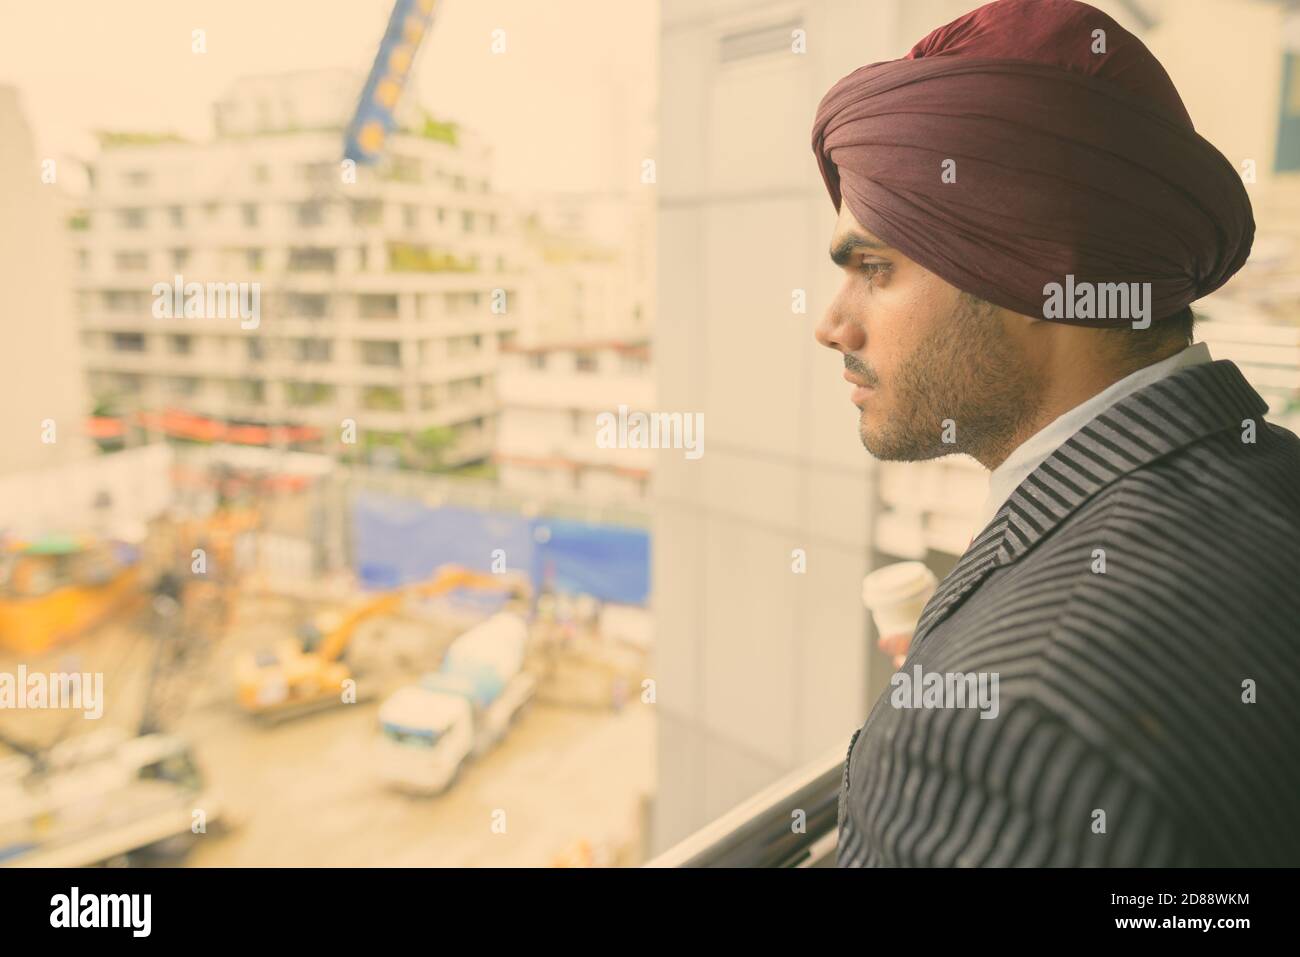 Young handsome Indian Sikh businessman wearing turban while exploring the city Stock Photo